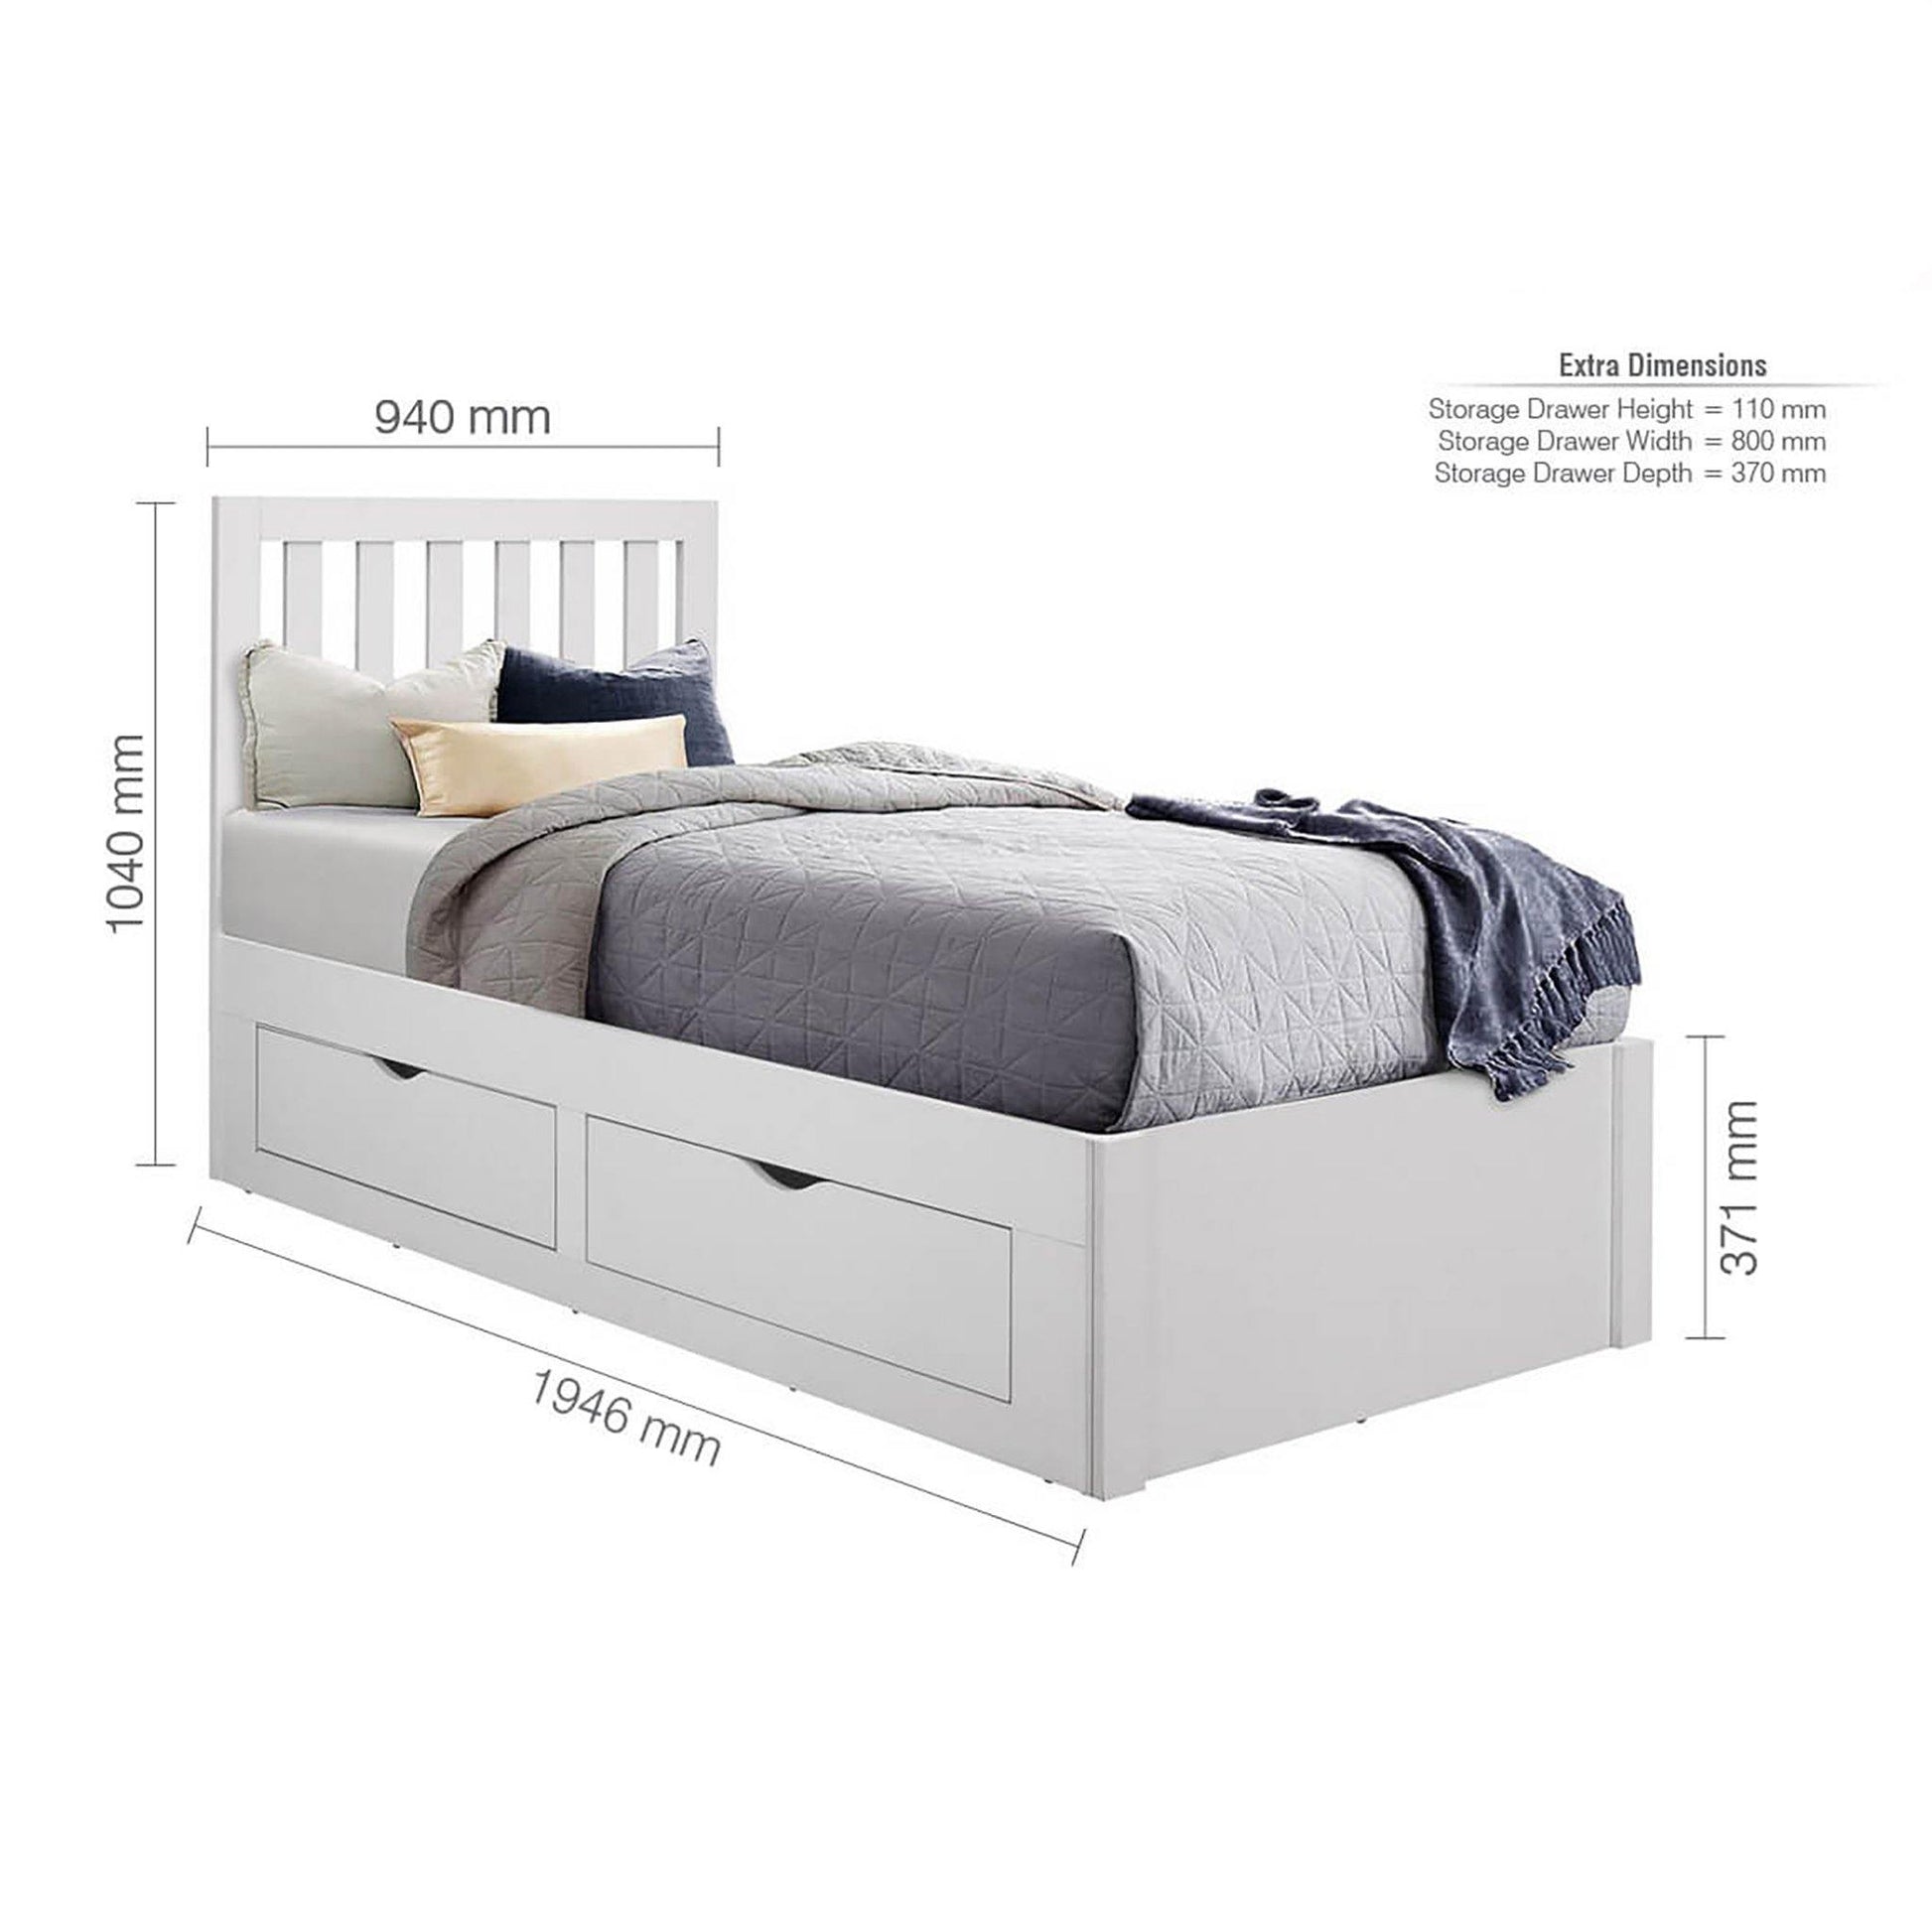 daisy single bed with drawers dimensions